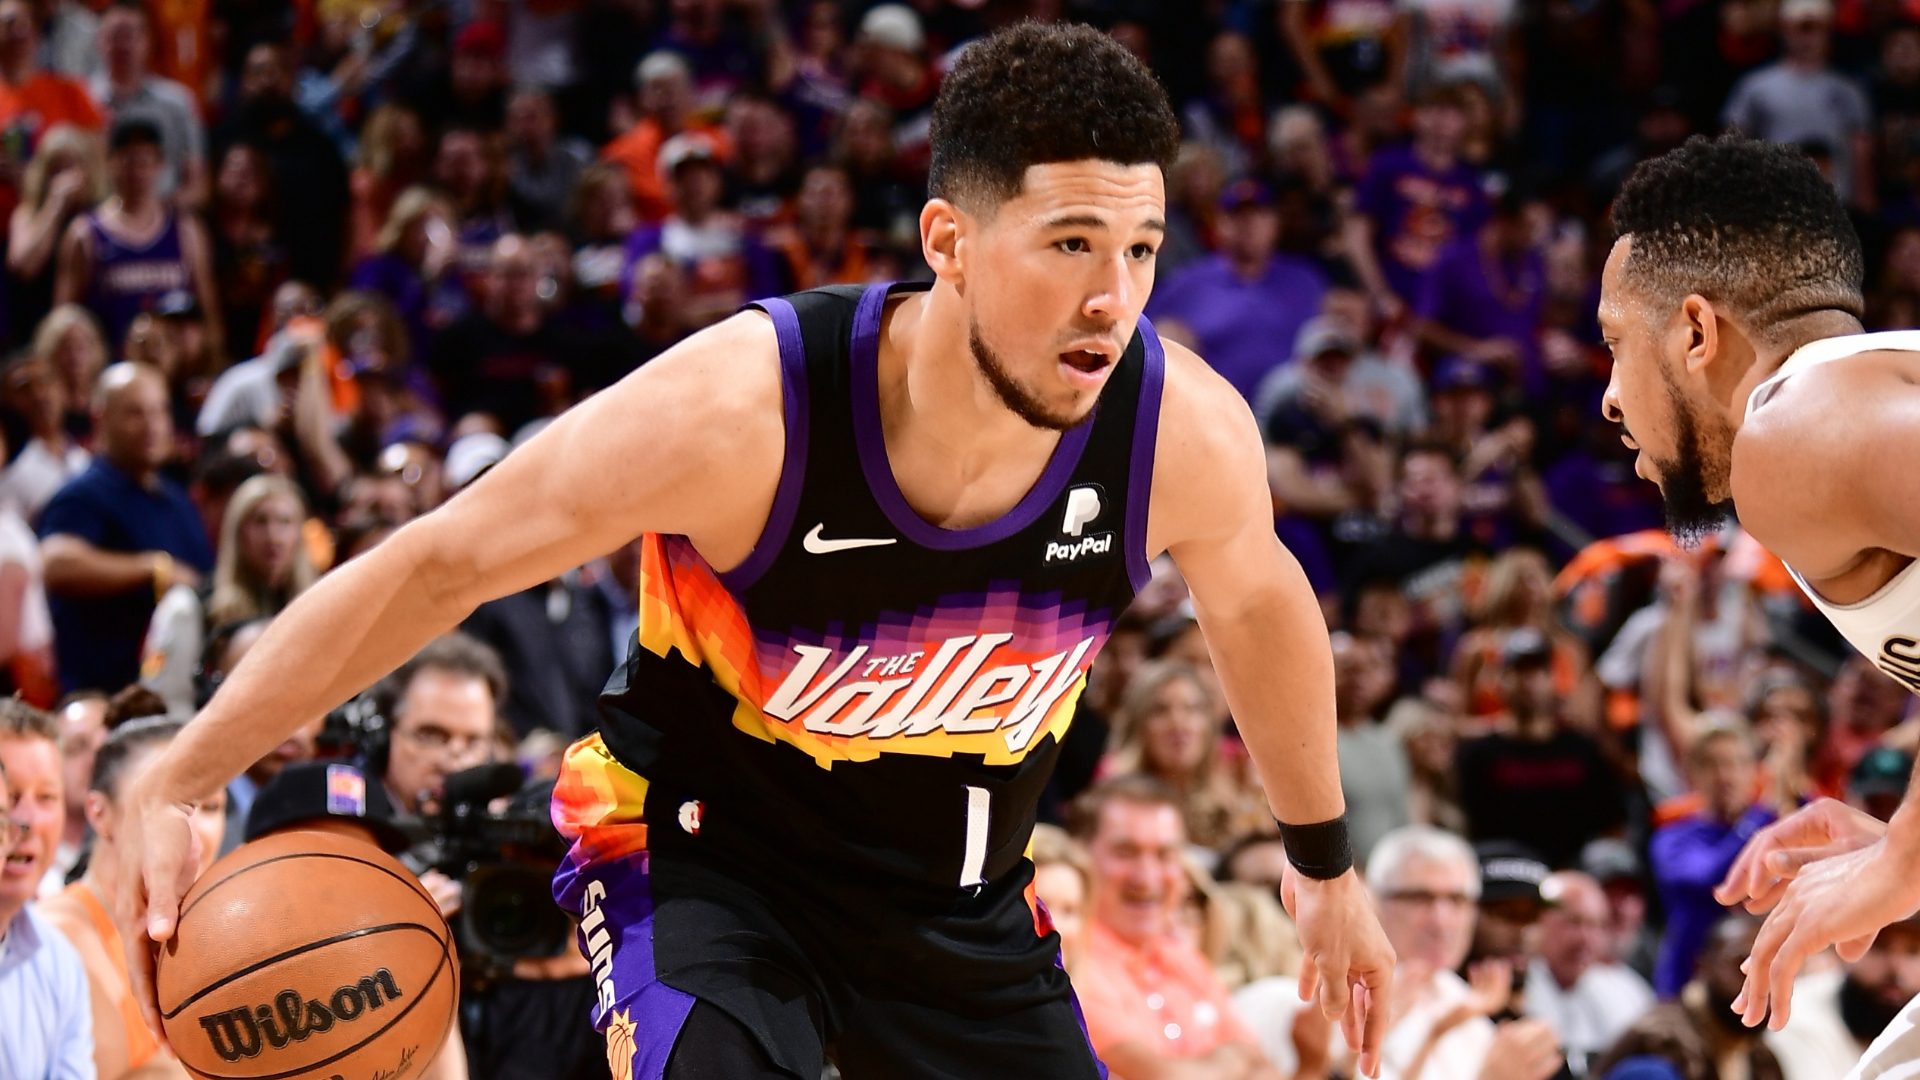 Hamstring Injury Could Keep Devin Booker out 2 to 3 Weeks